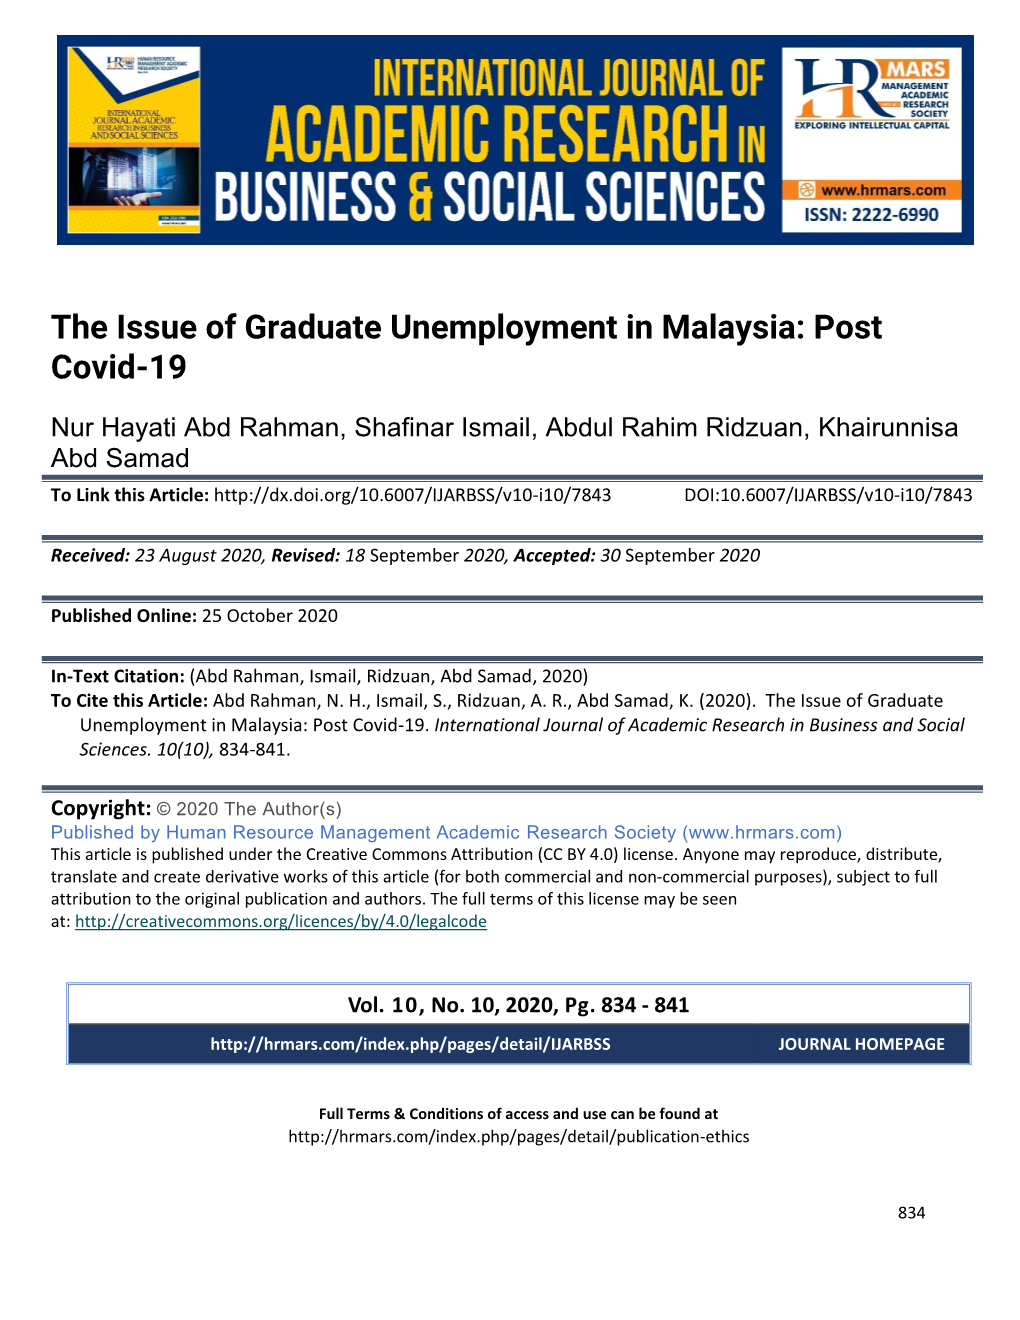 The Issue of Graduate Unemployment in Malaysia: Post Covid-19